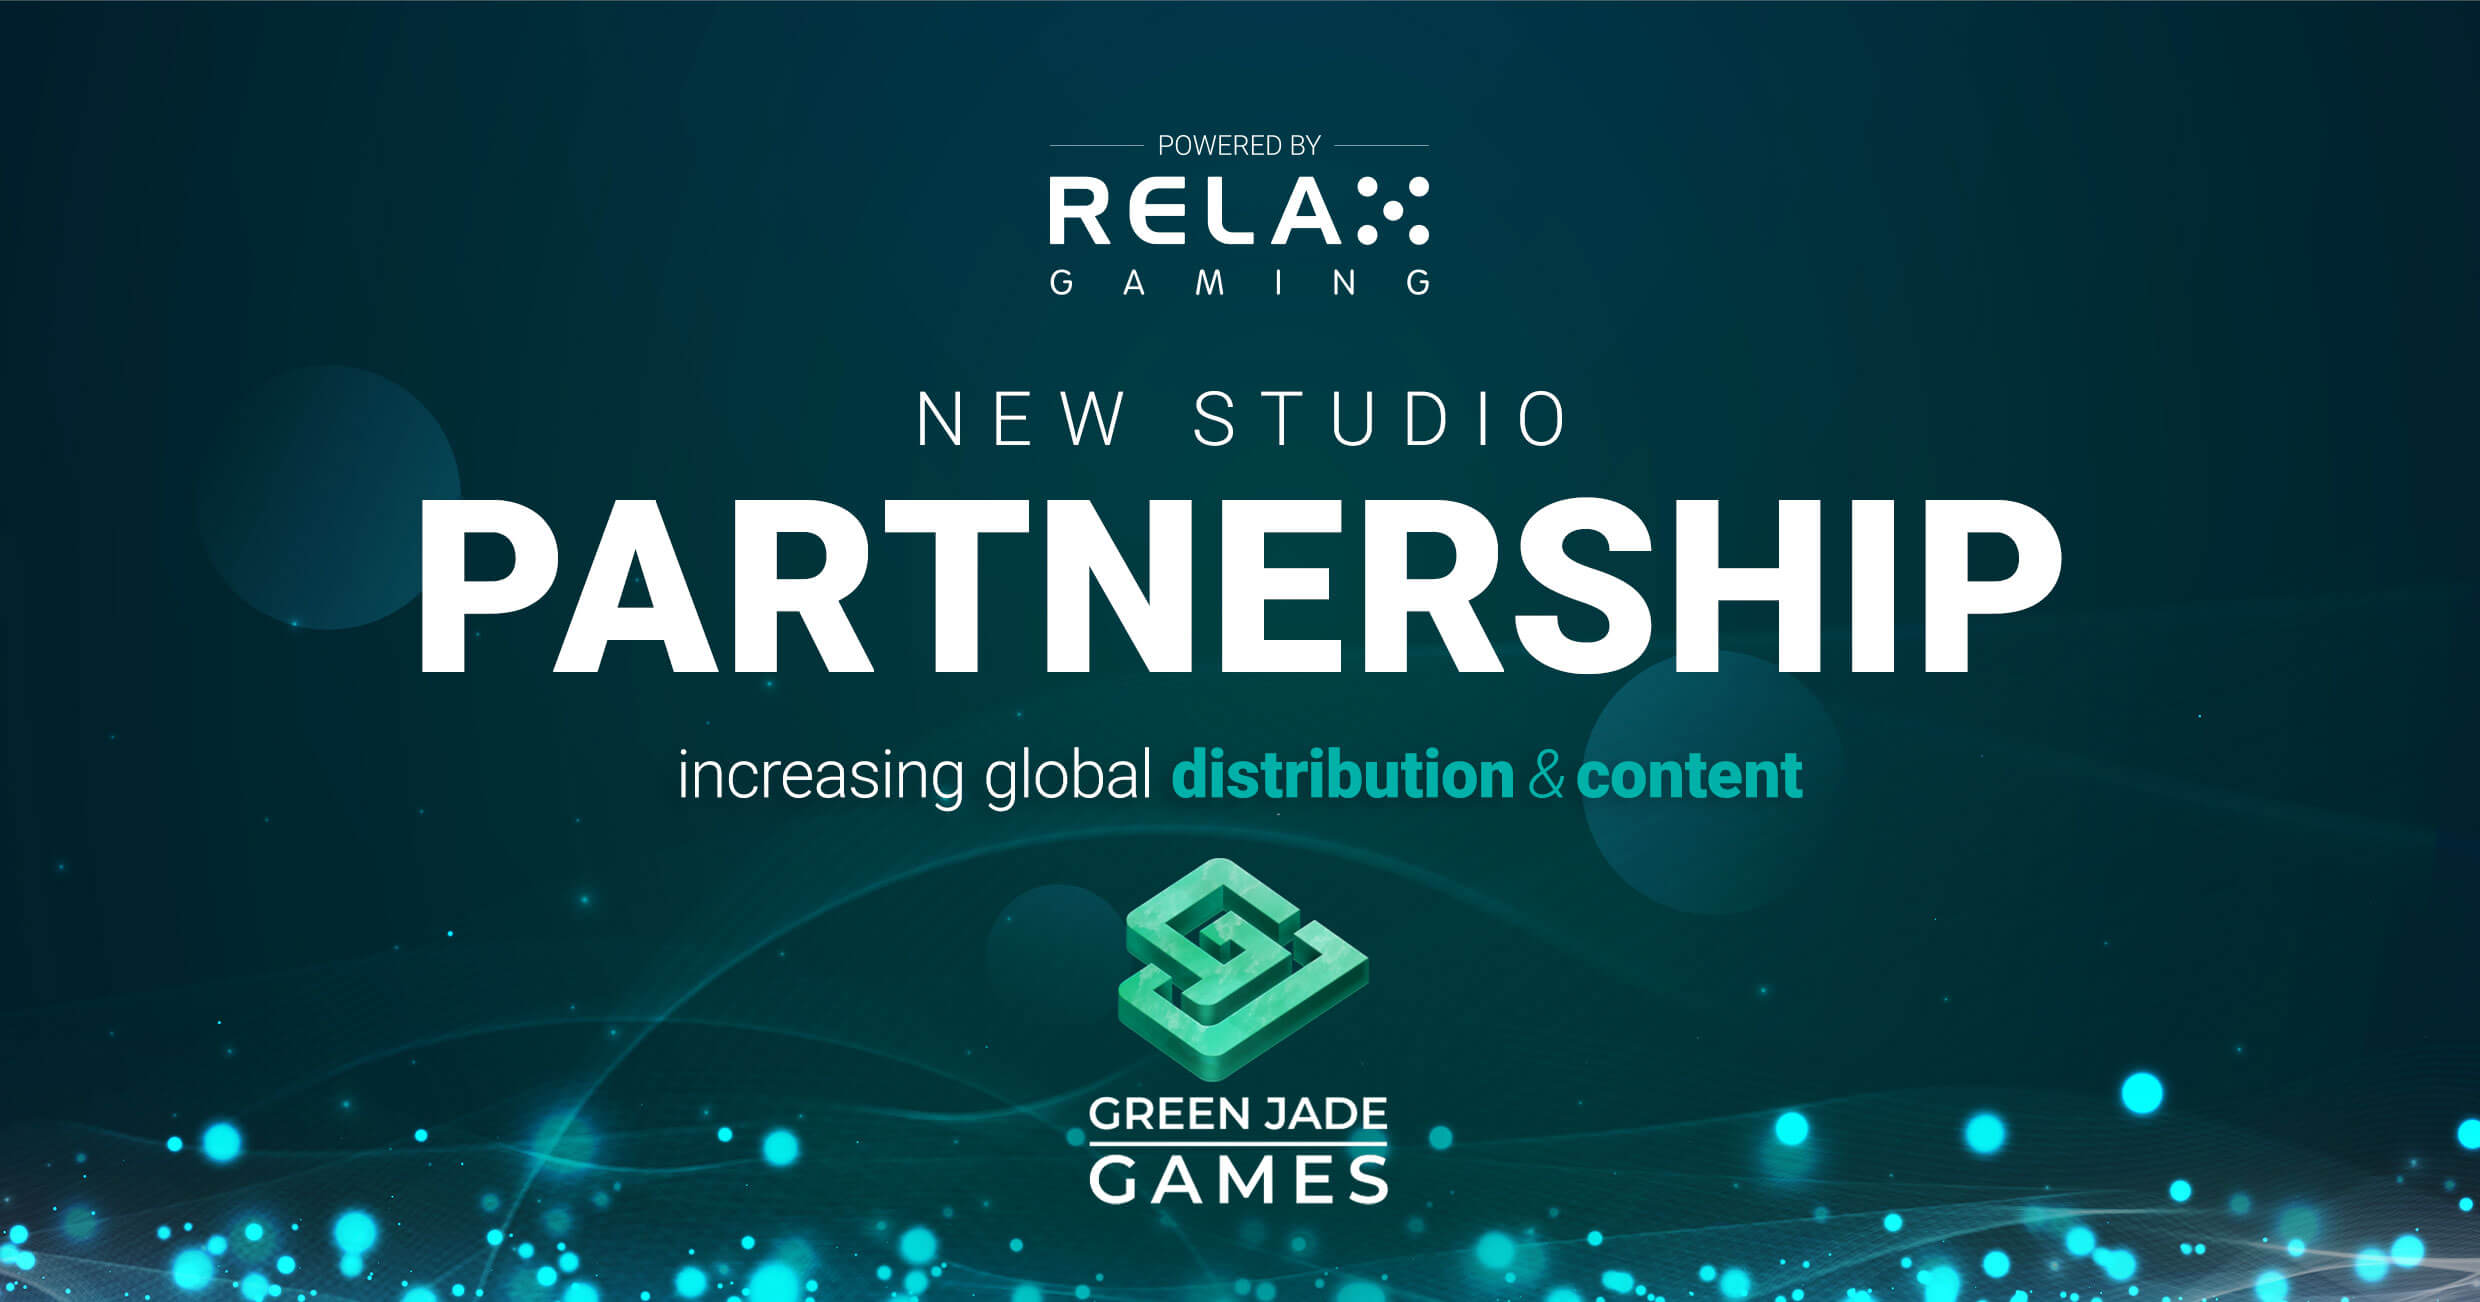 Relax Gaming Adds Green Jade Games to Powered By Partner Program